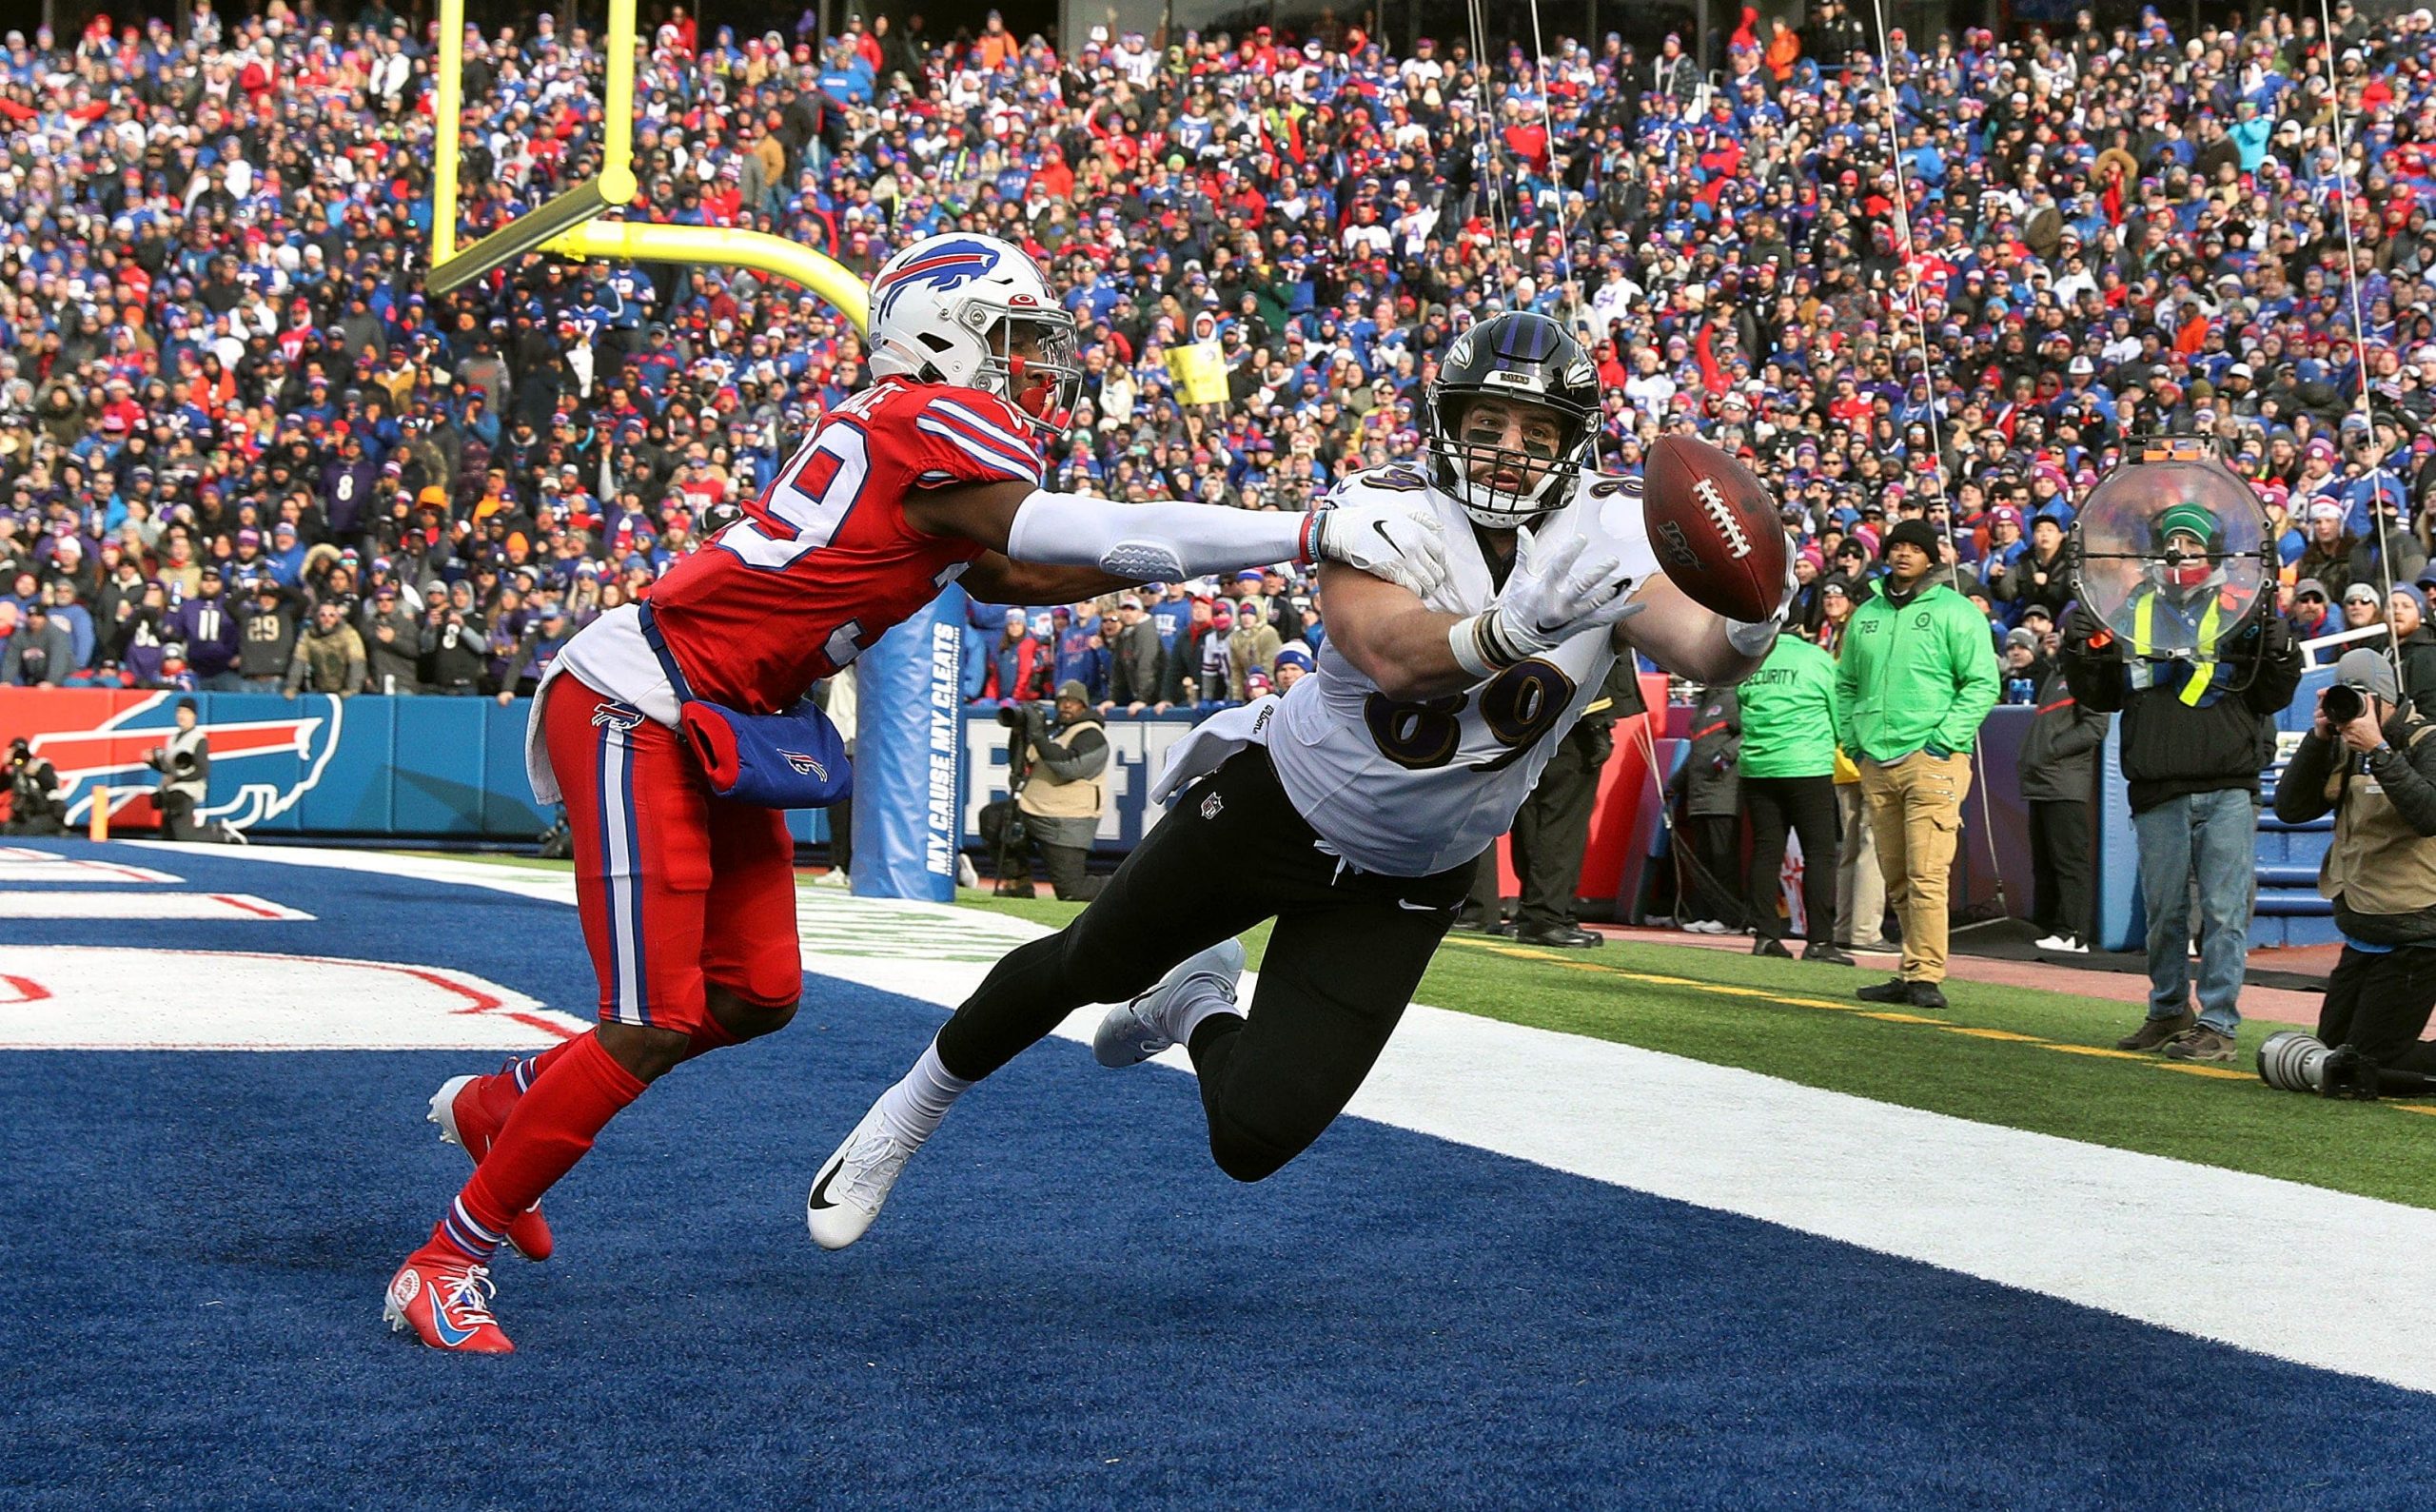 Ravens tight end Mark Andrews can't make this catch in the end zone while being covered by Bills Levi Wallace